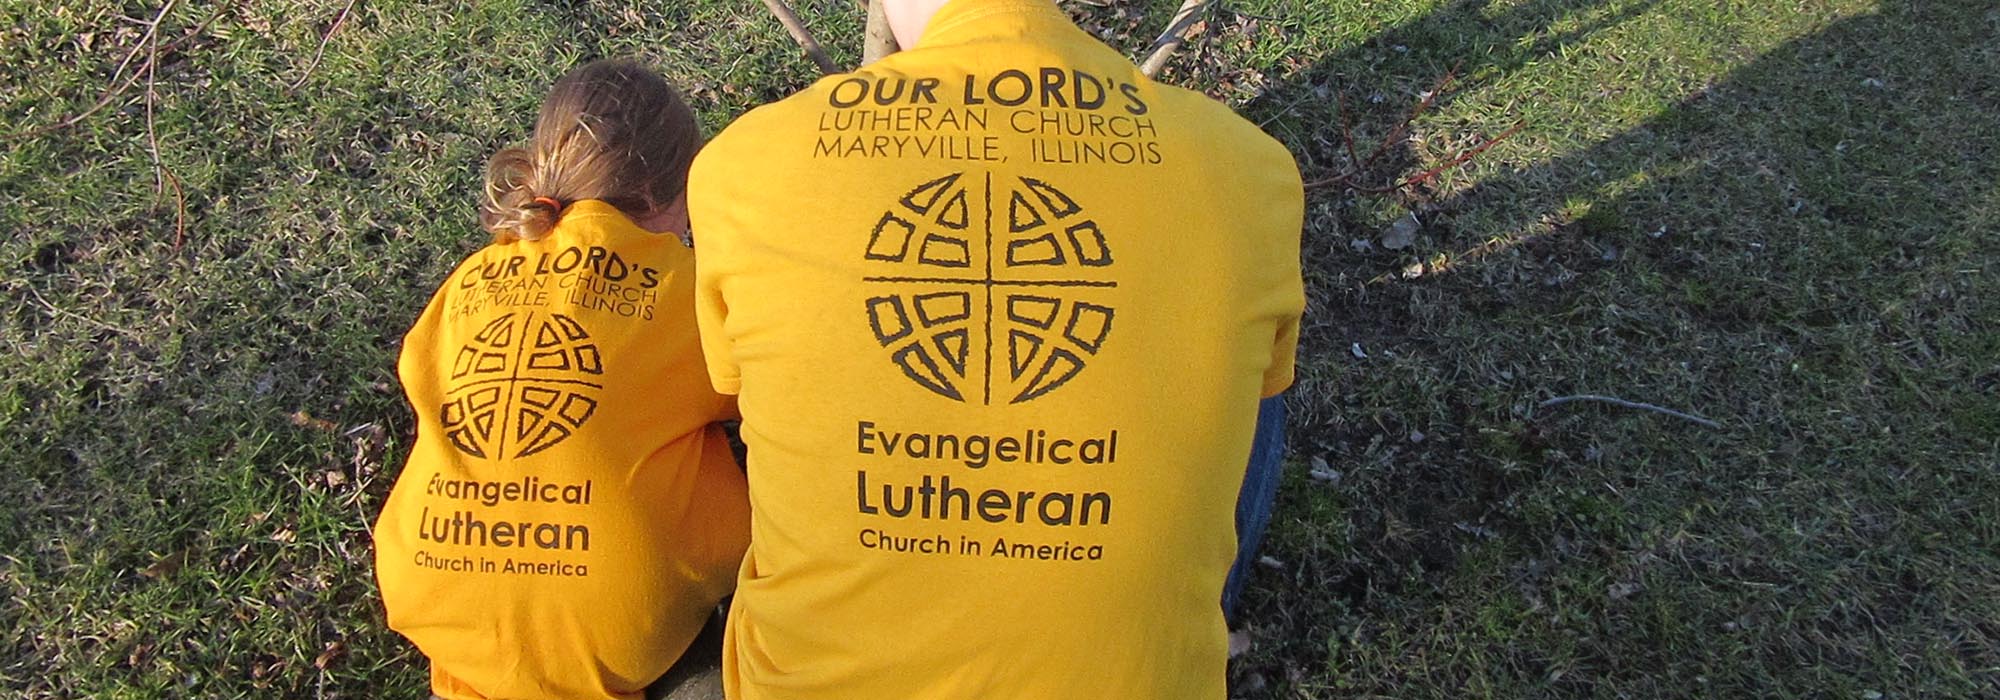 About Our Lord's Lutheran Church